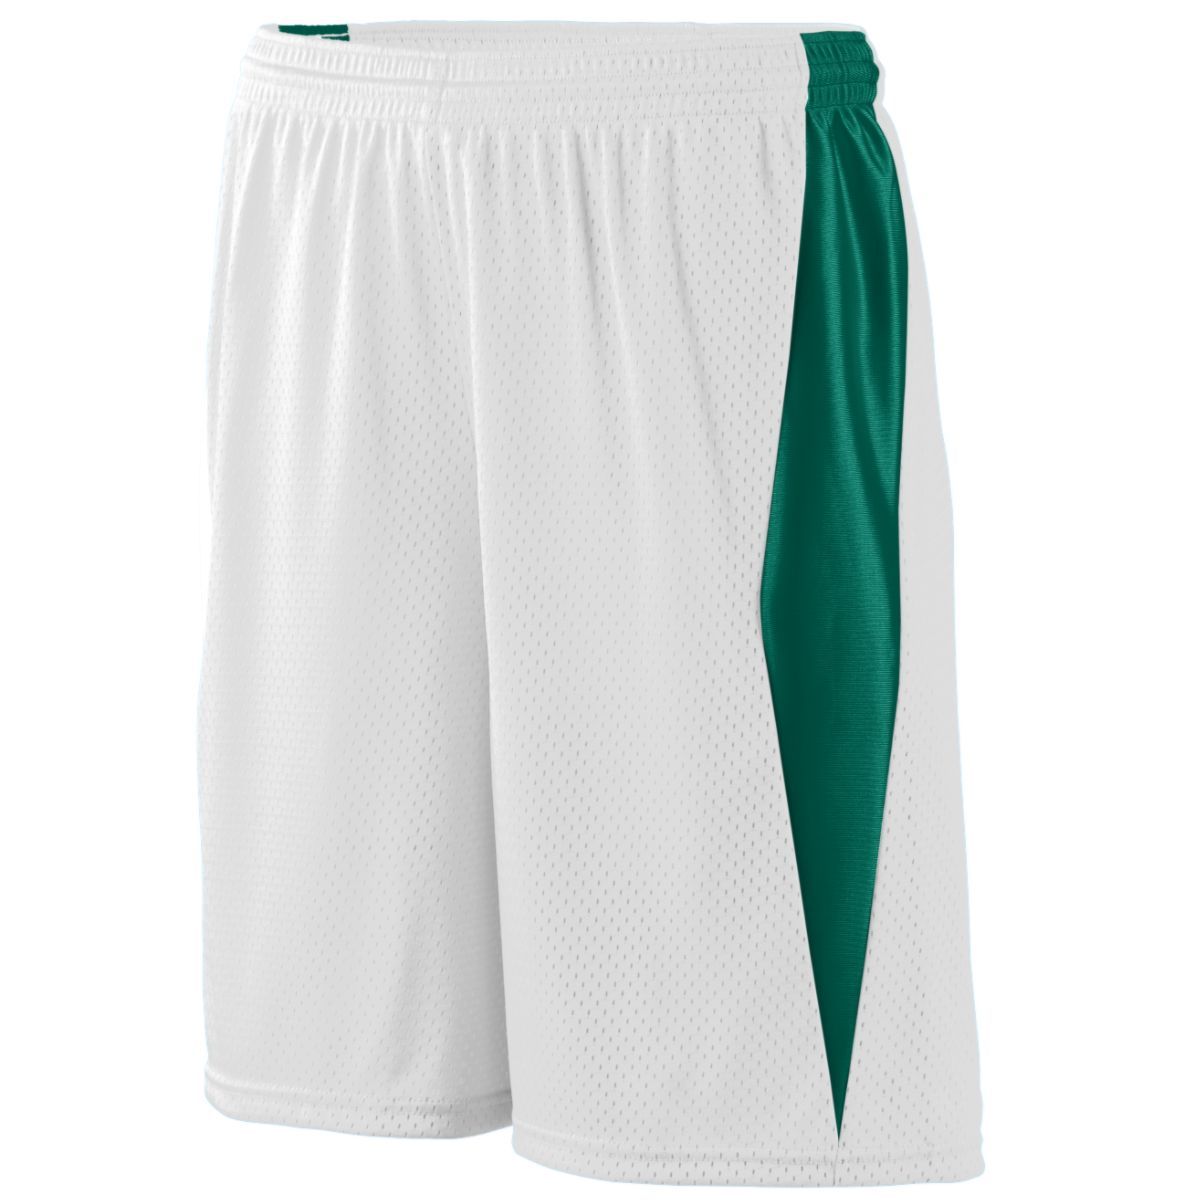 Augusta Sportswear Top Score Shorts in White/Dark Green  -Part of the Adult, Adult-Shorts, Augusta-Products, Lacrosse, All-Sports, All-Sports-1 product lines at KanaleyCreations.com